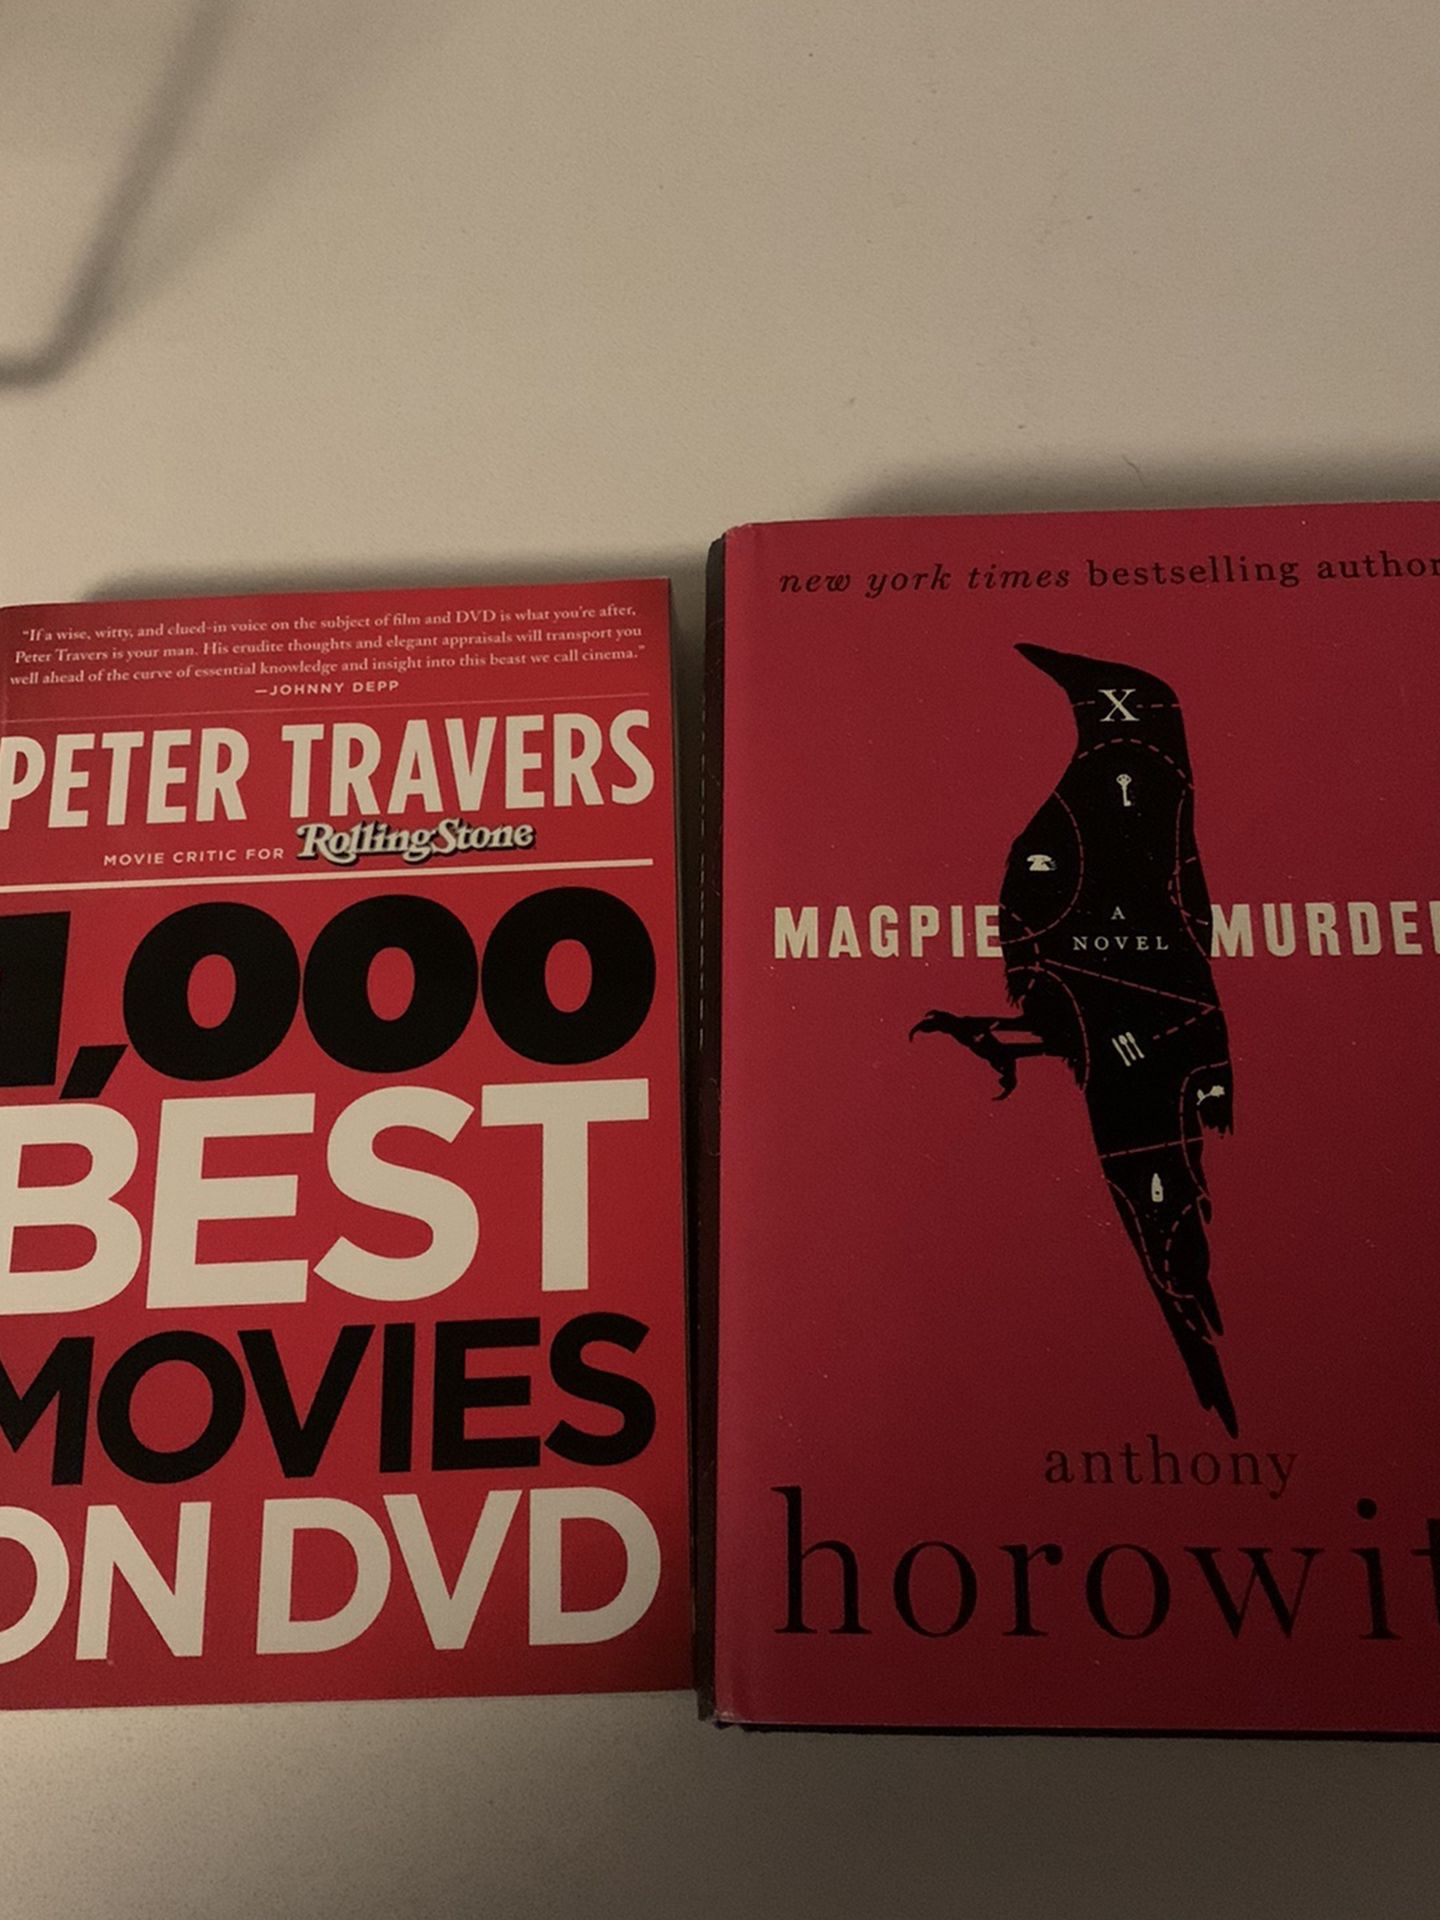 1,000 BEST MOVIES ON DVD & MAGPIE A NOVEL MURDERS BOOKS $35 For Both